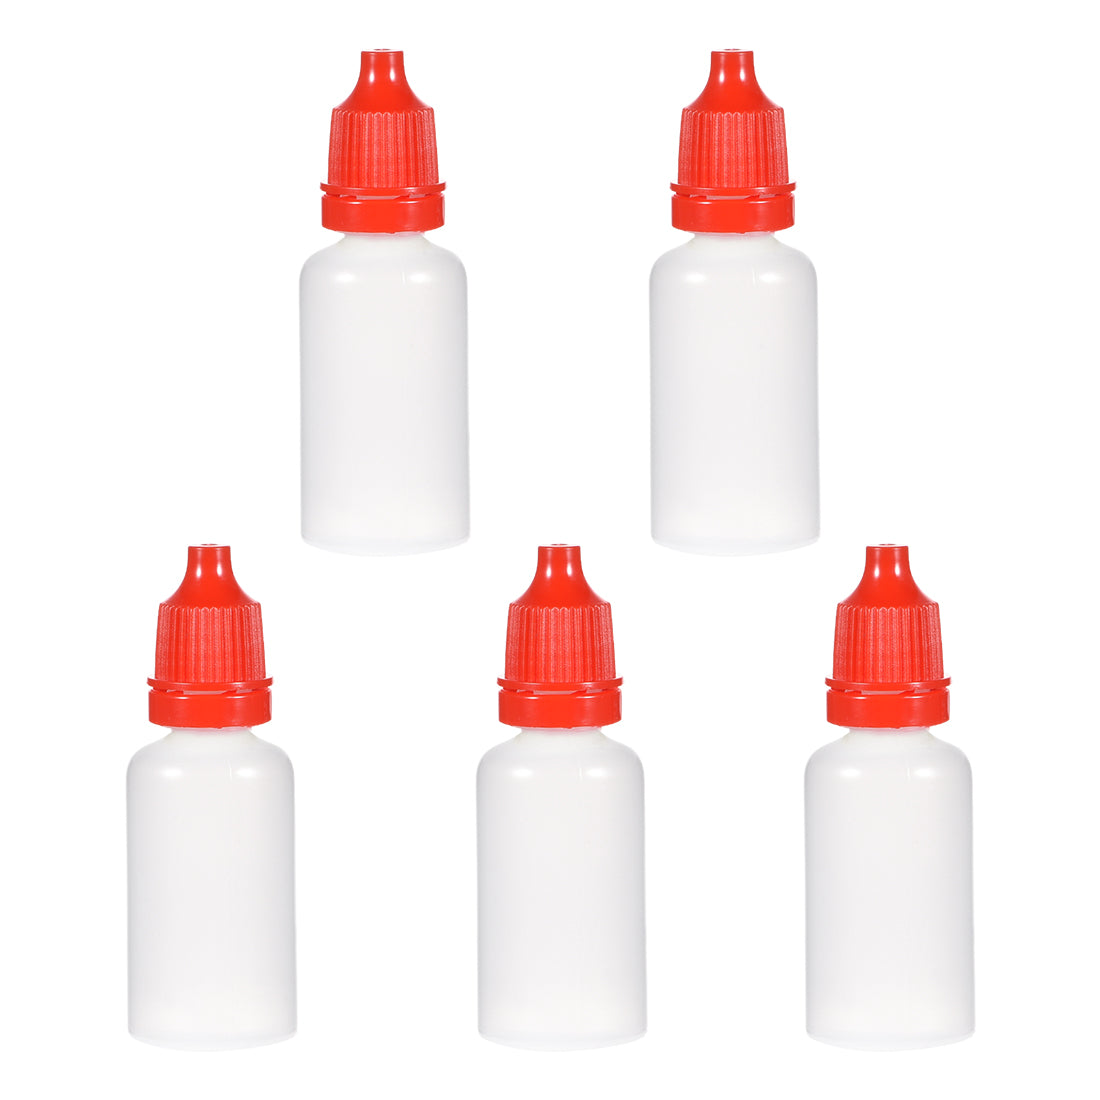 uxcell Uxcell 20ml/0.68 oz Empty Squeezable Dropper Bottle Red 5pcs